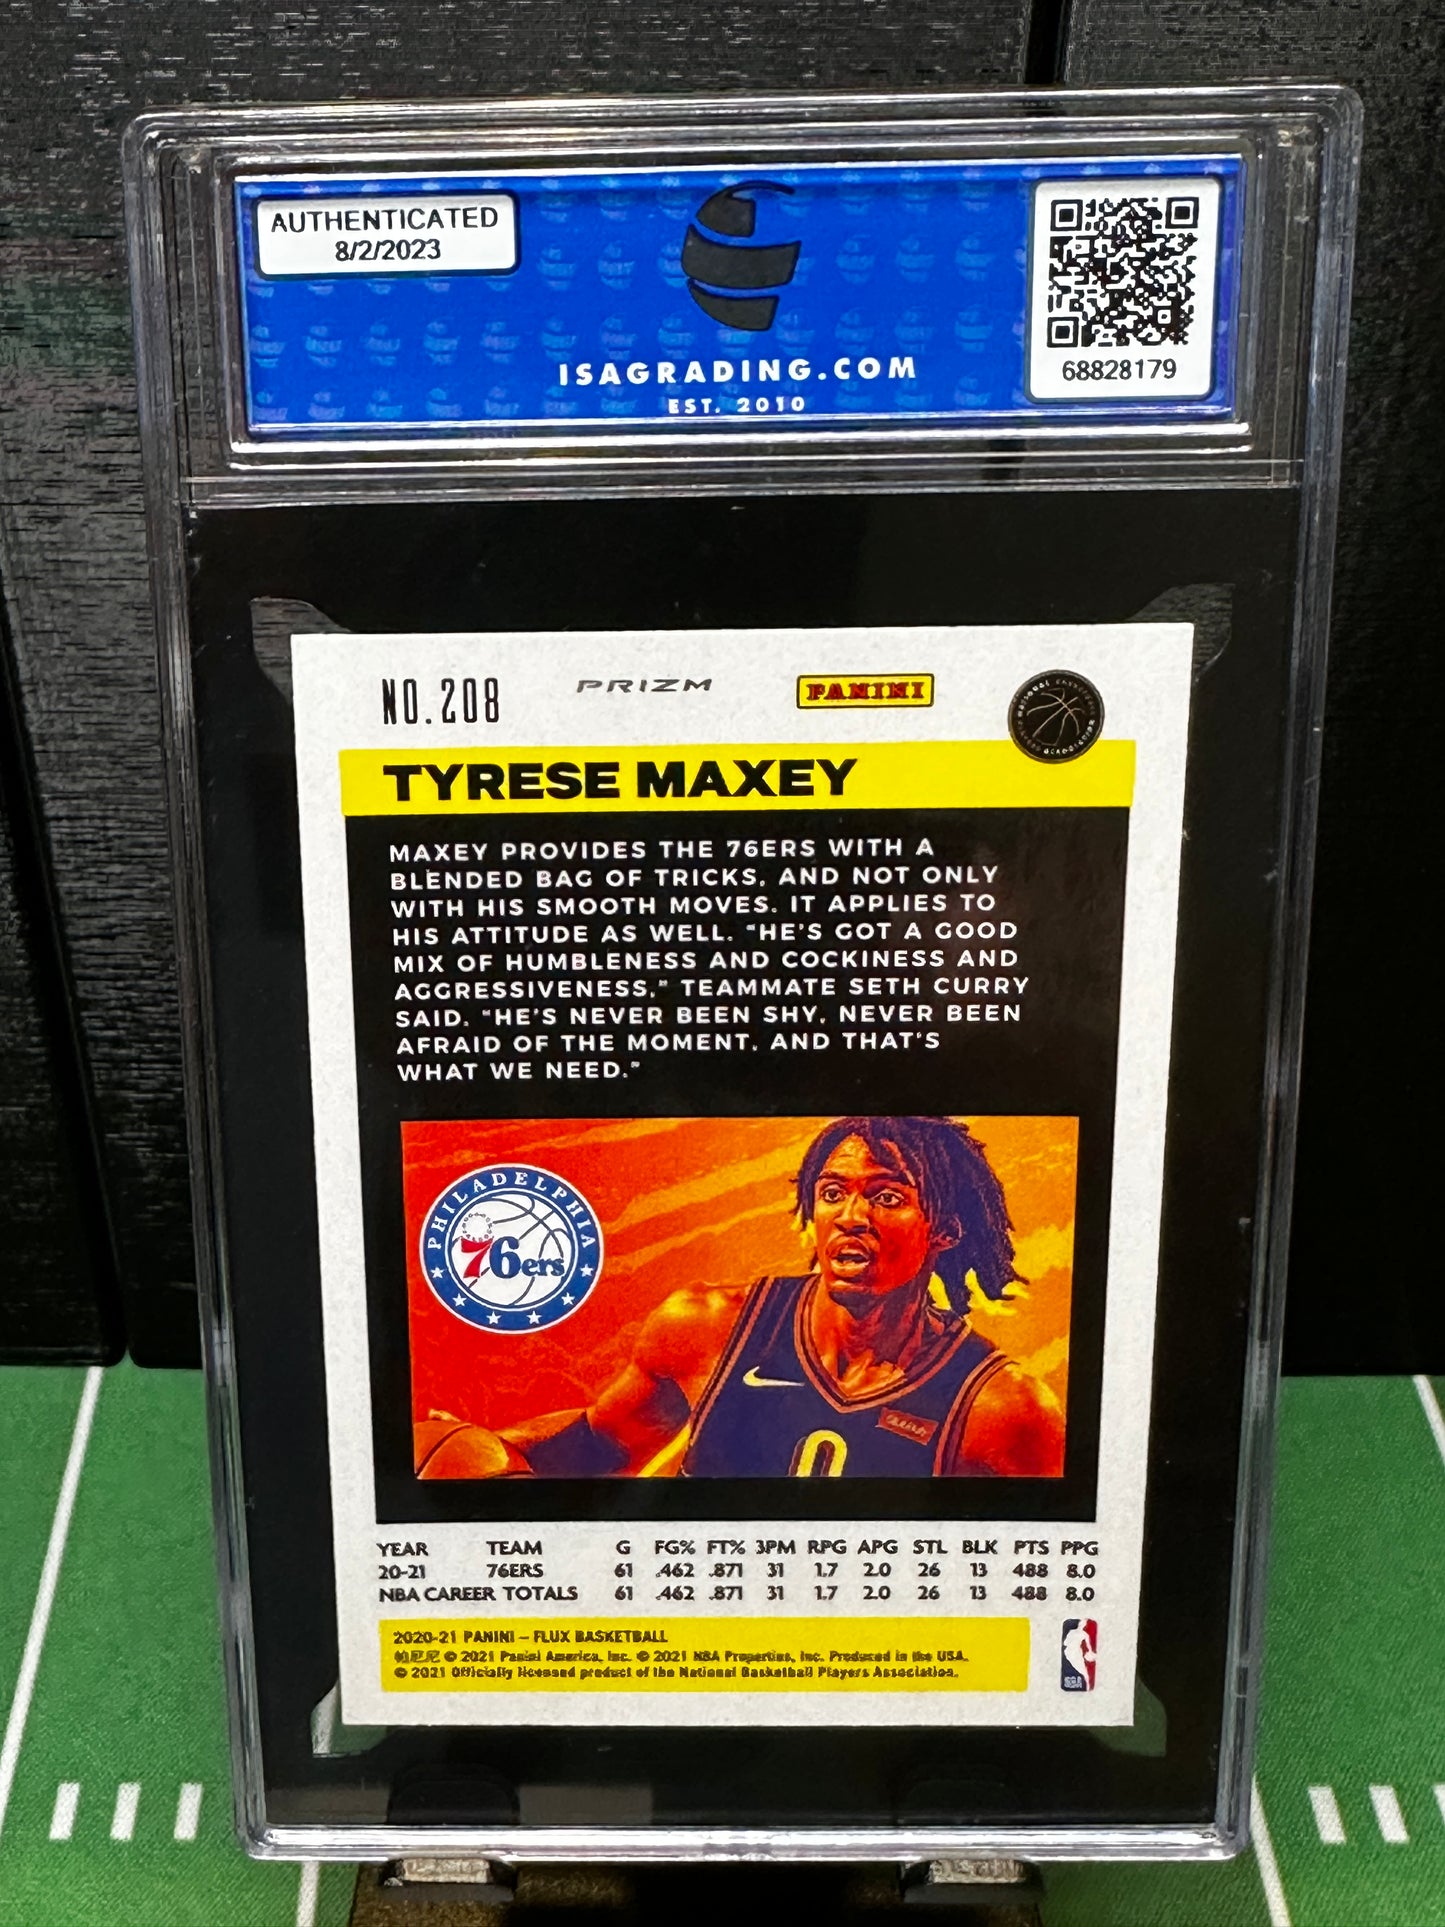 2020 PANINI FLUX TYRESE MAXEY ROOKIE CARD PULSAR PRIZM SP 76ERS #208 RC ISA 10